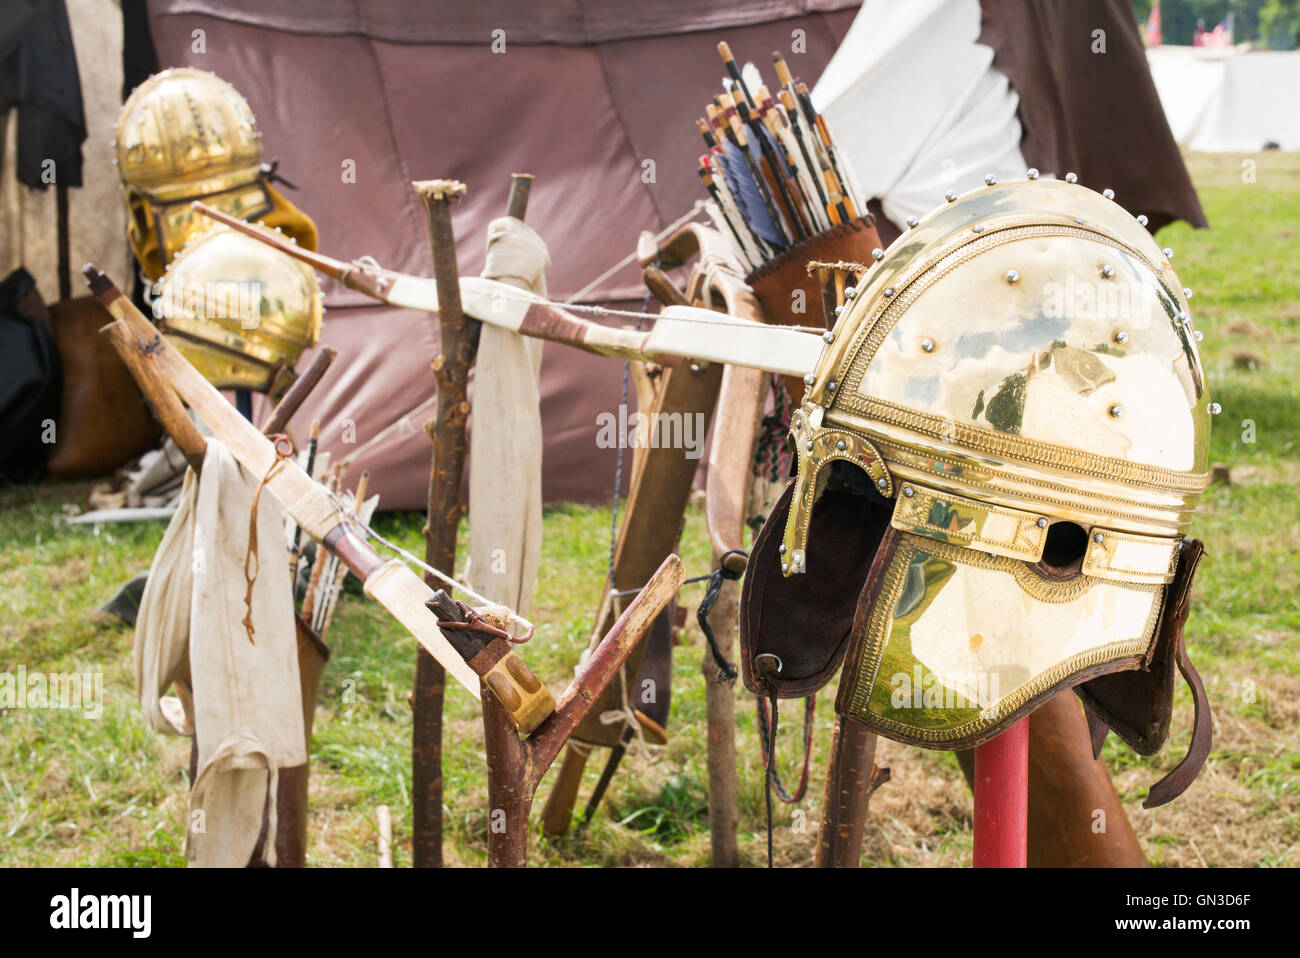 Late roman ridge helmet at a reenactment, Spetchley Park, Worcestershire, England Stock Photo